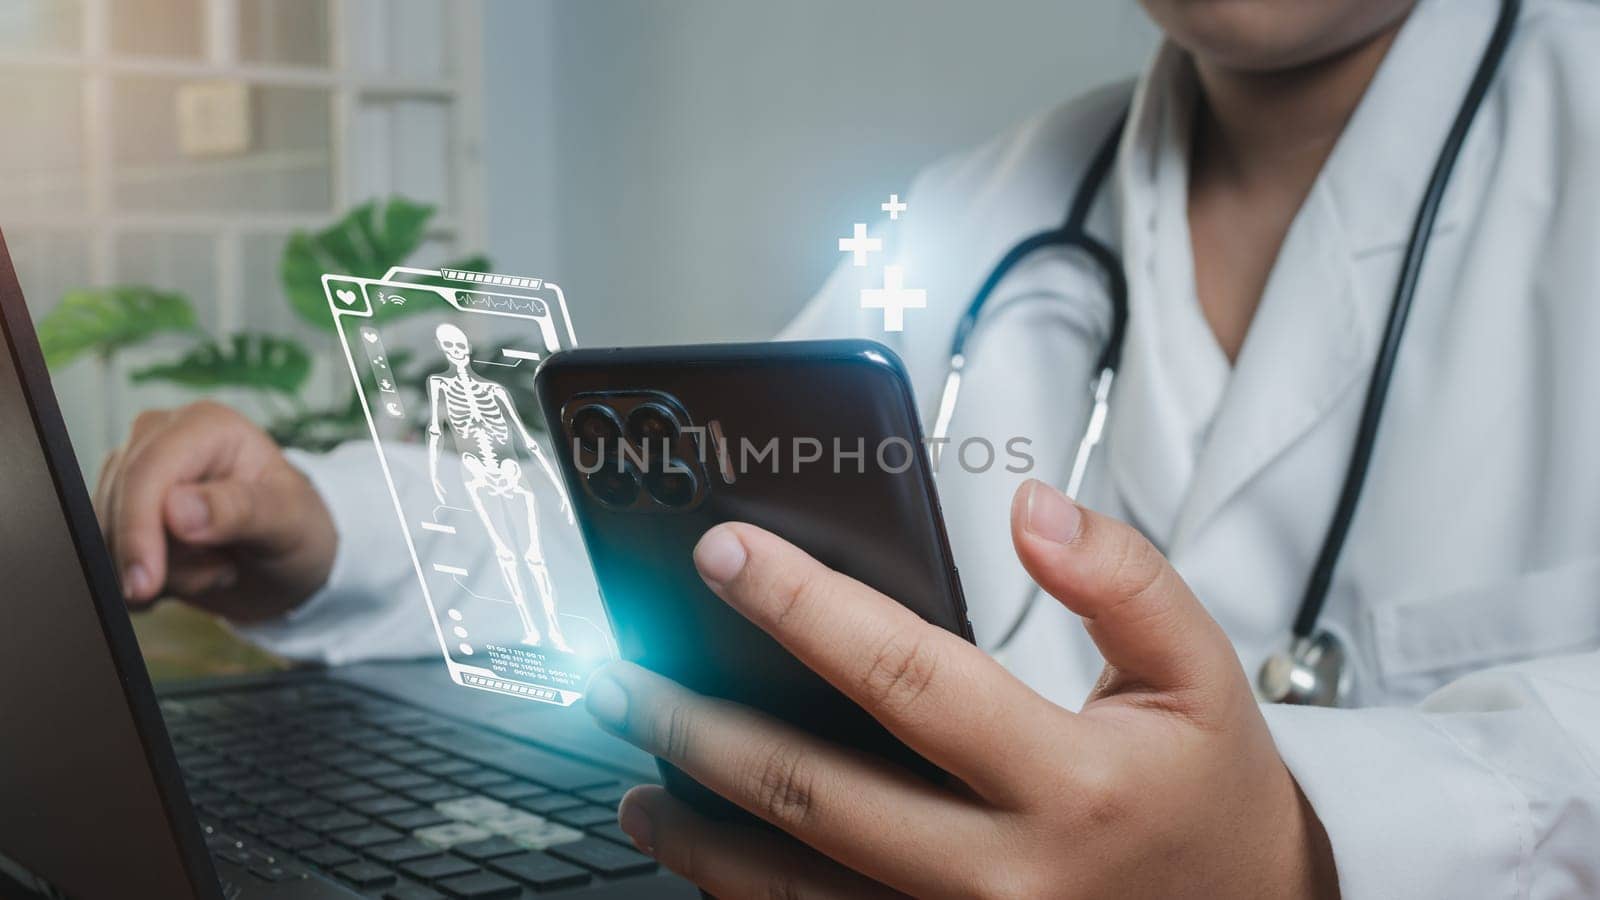 Doctors use smartphones and computers to research medical information. medical concept by Unimages2527